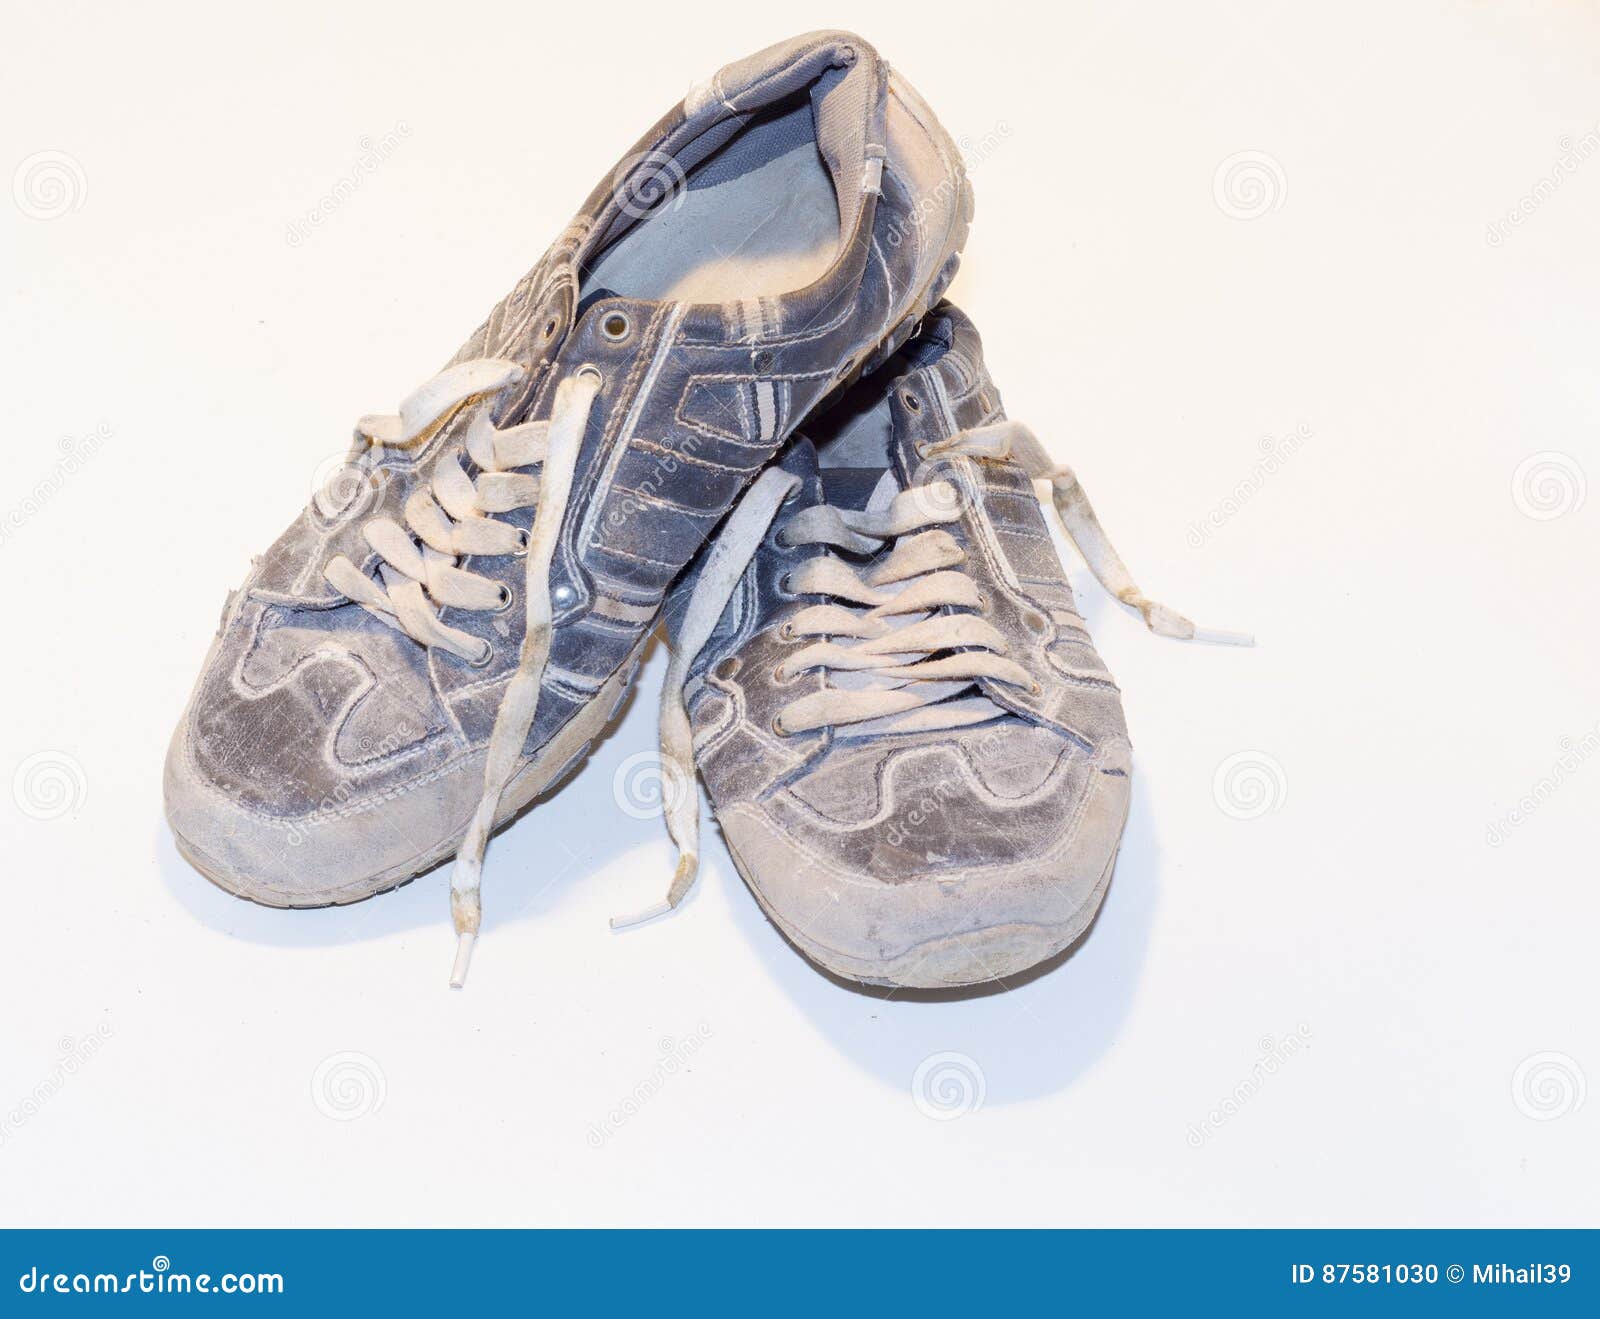 Very Old Running Shoes with Laces on a Light Background. Stock Photo ...